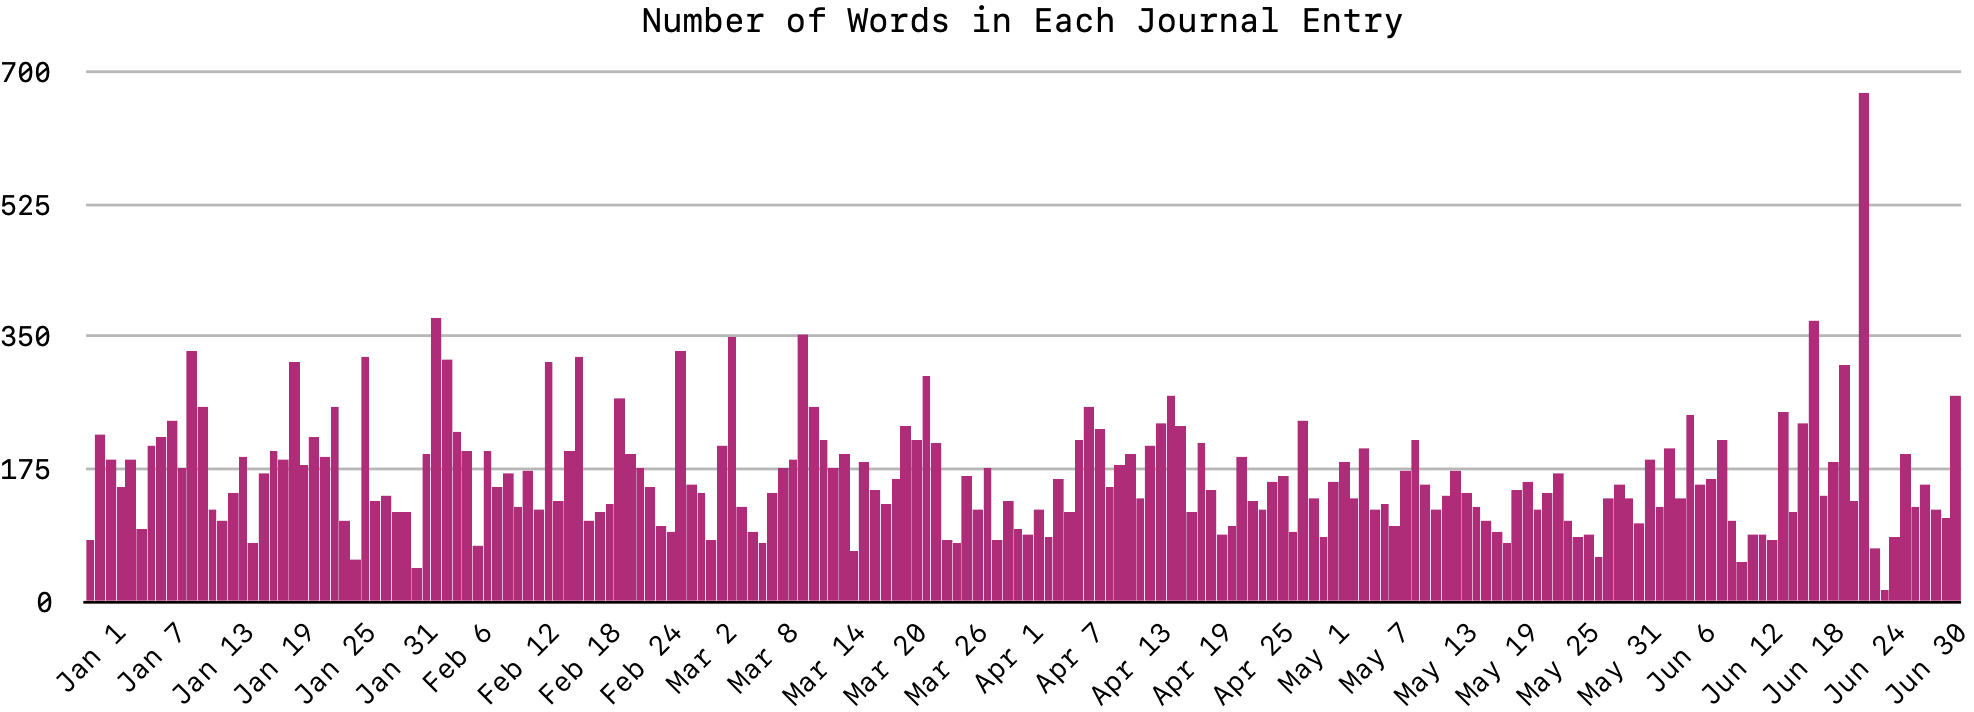 Number of Words in Each Journal Entry